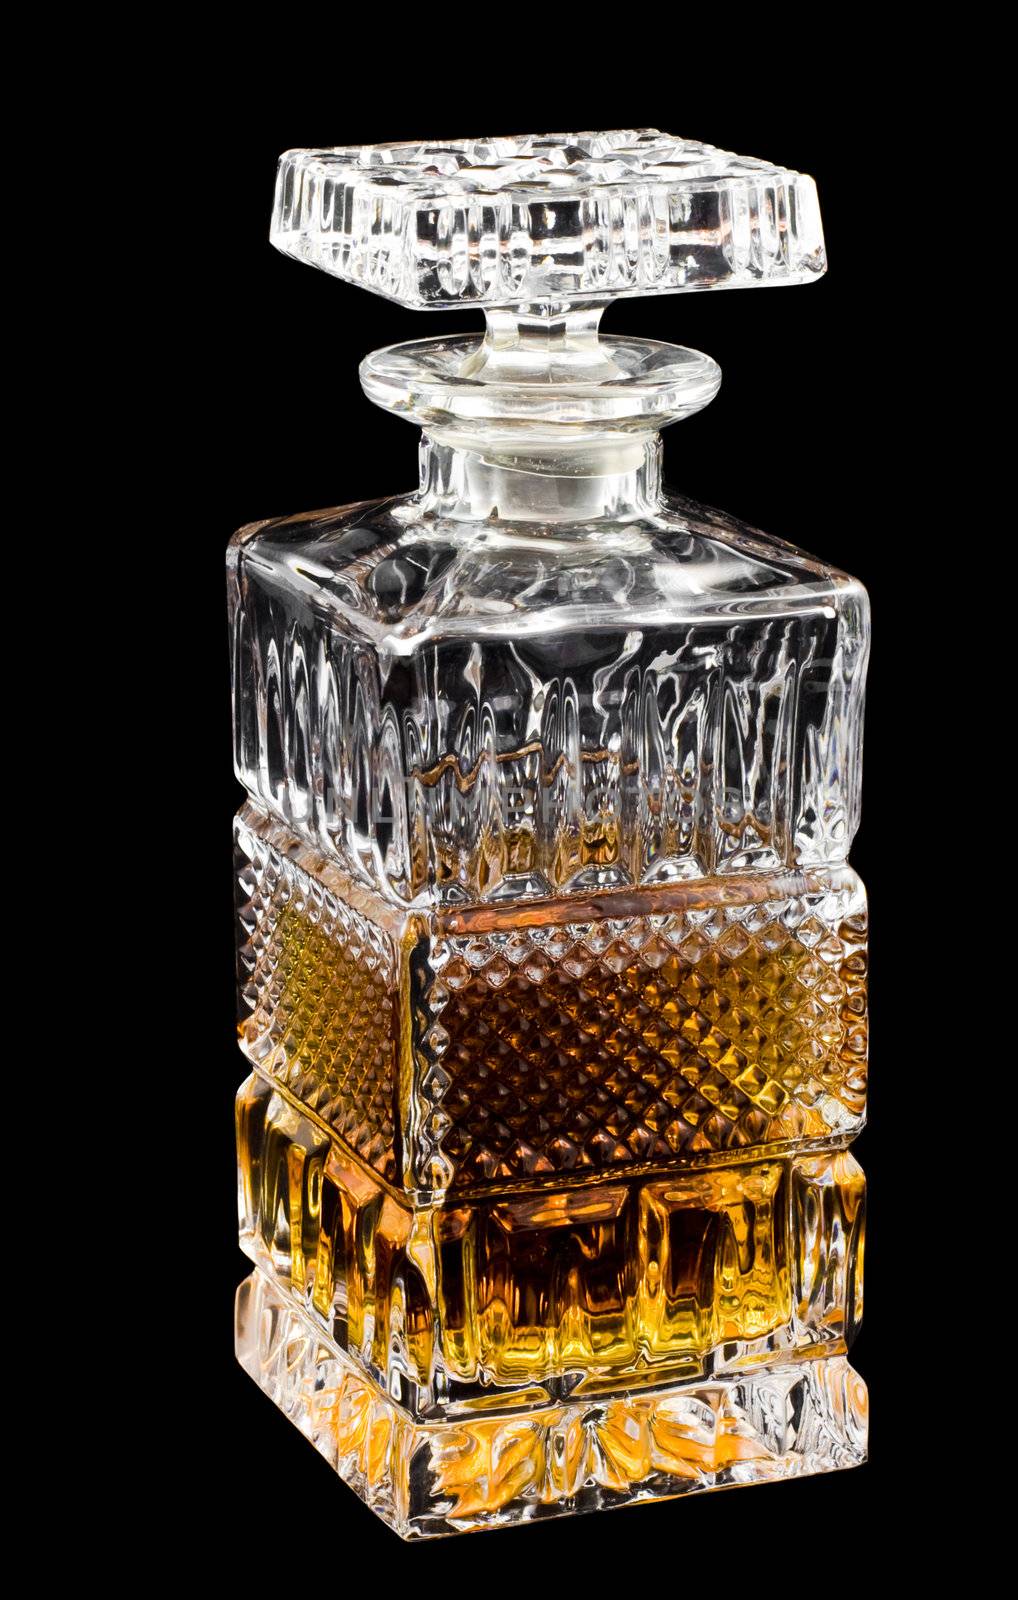 Crystal decanter with whiskey isolated over black